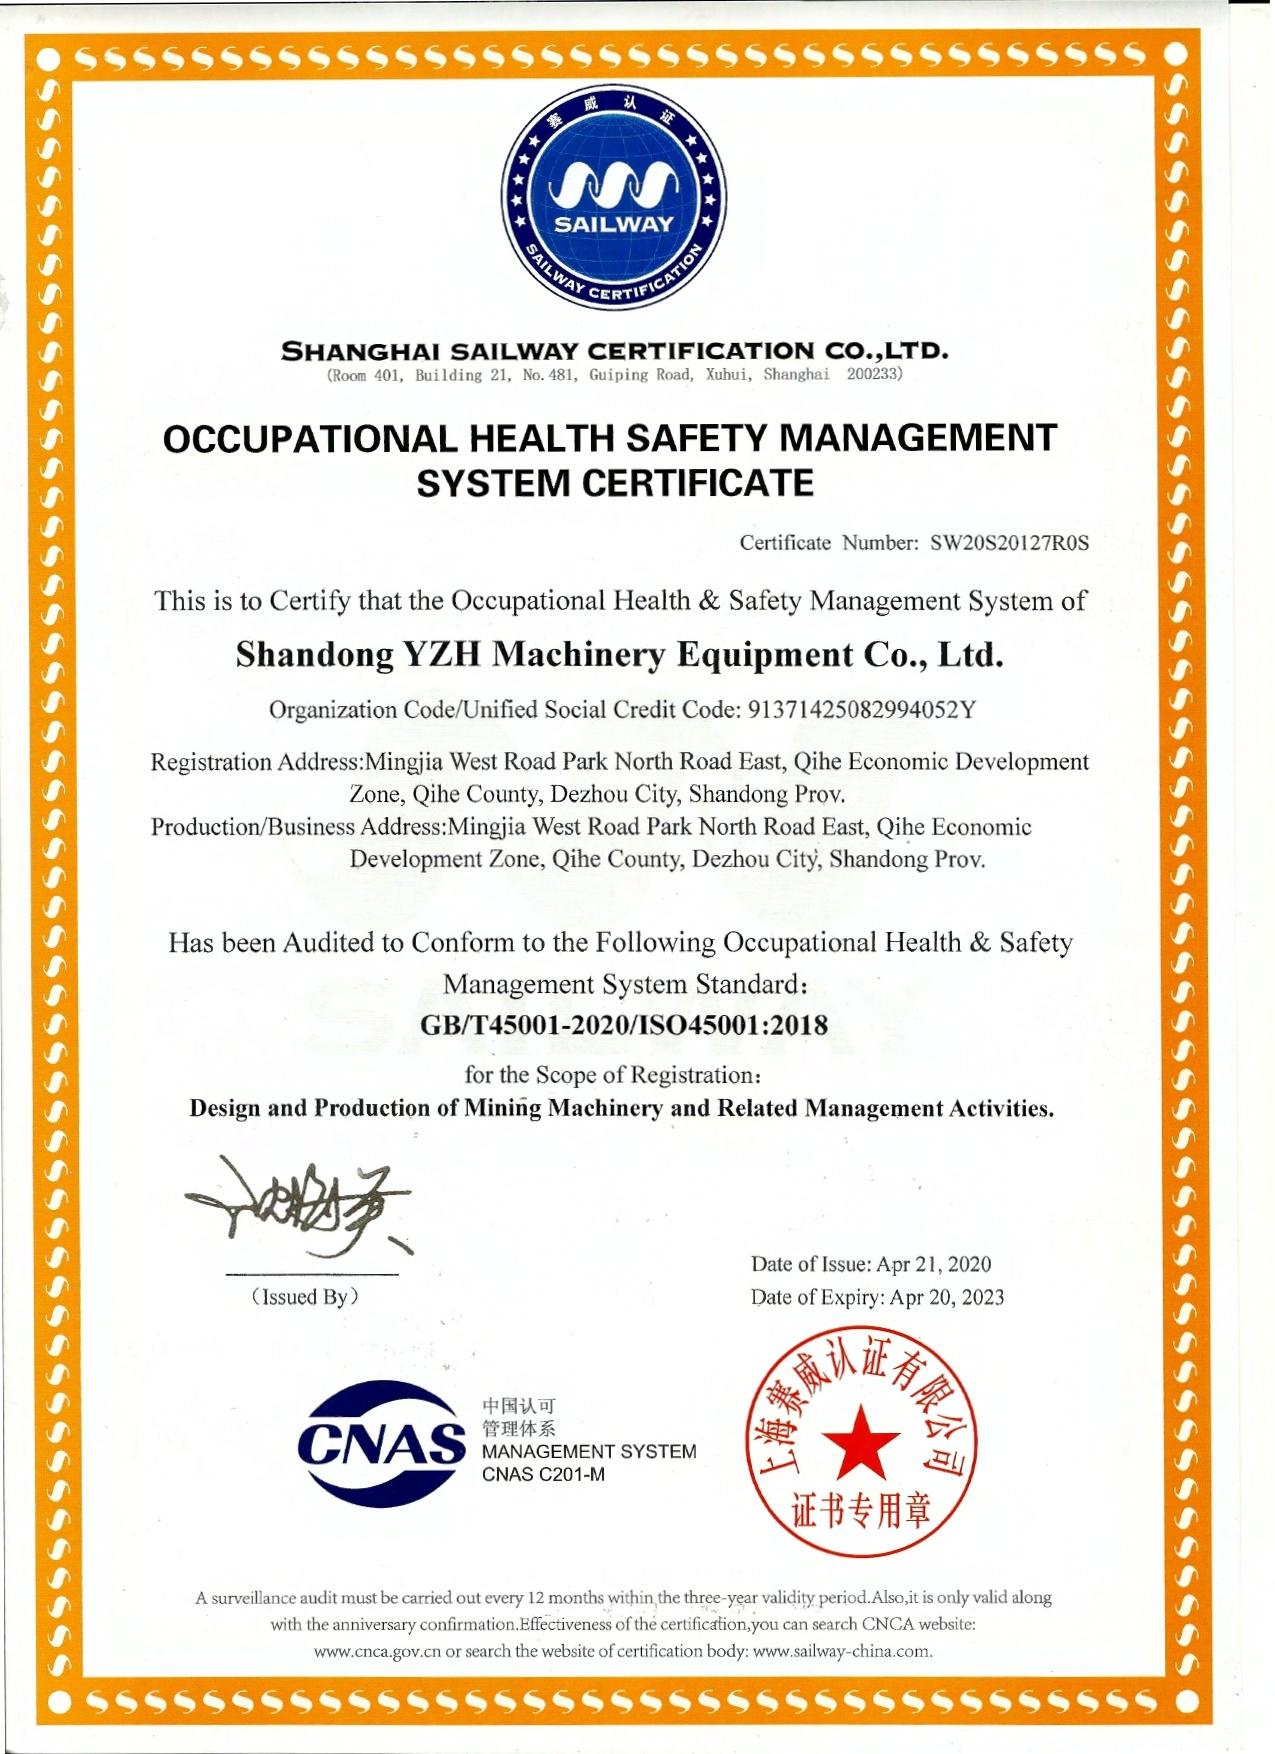 Occupational Health Safety Management System Certificate